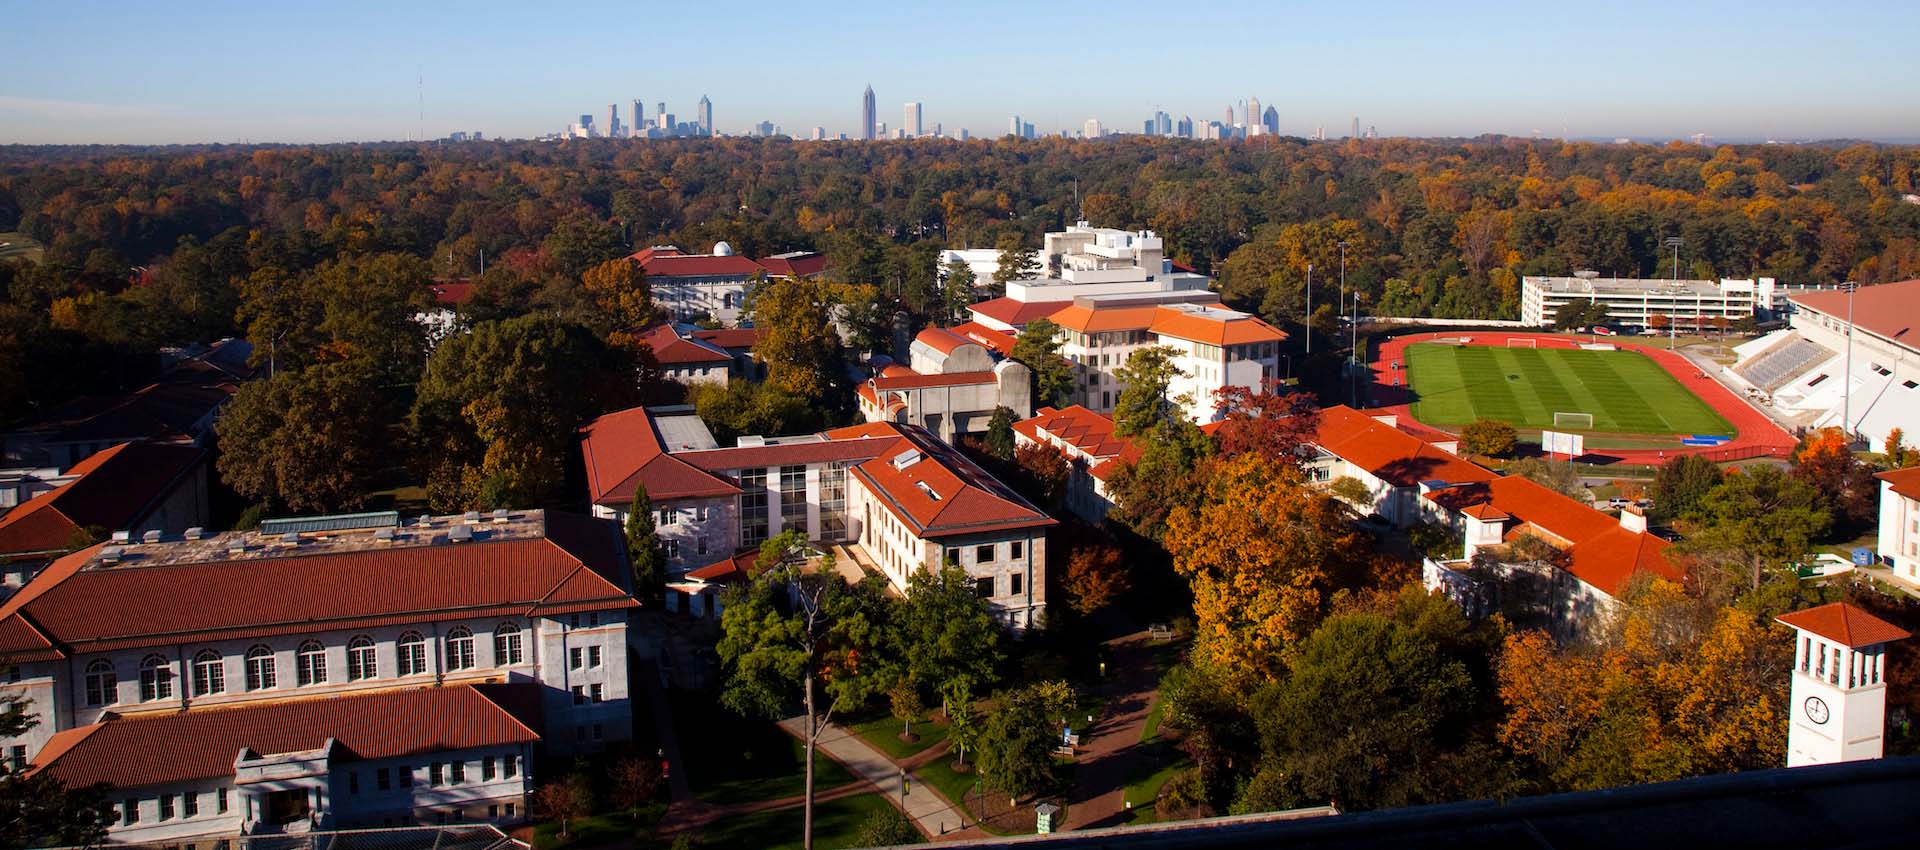 Aerial view of campus with the Atlanta skyline in the background